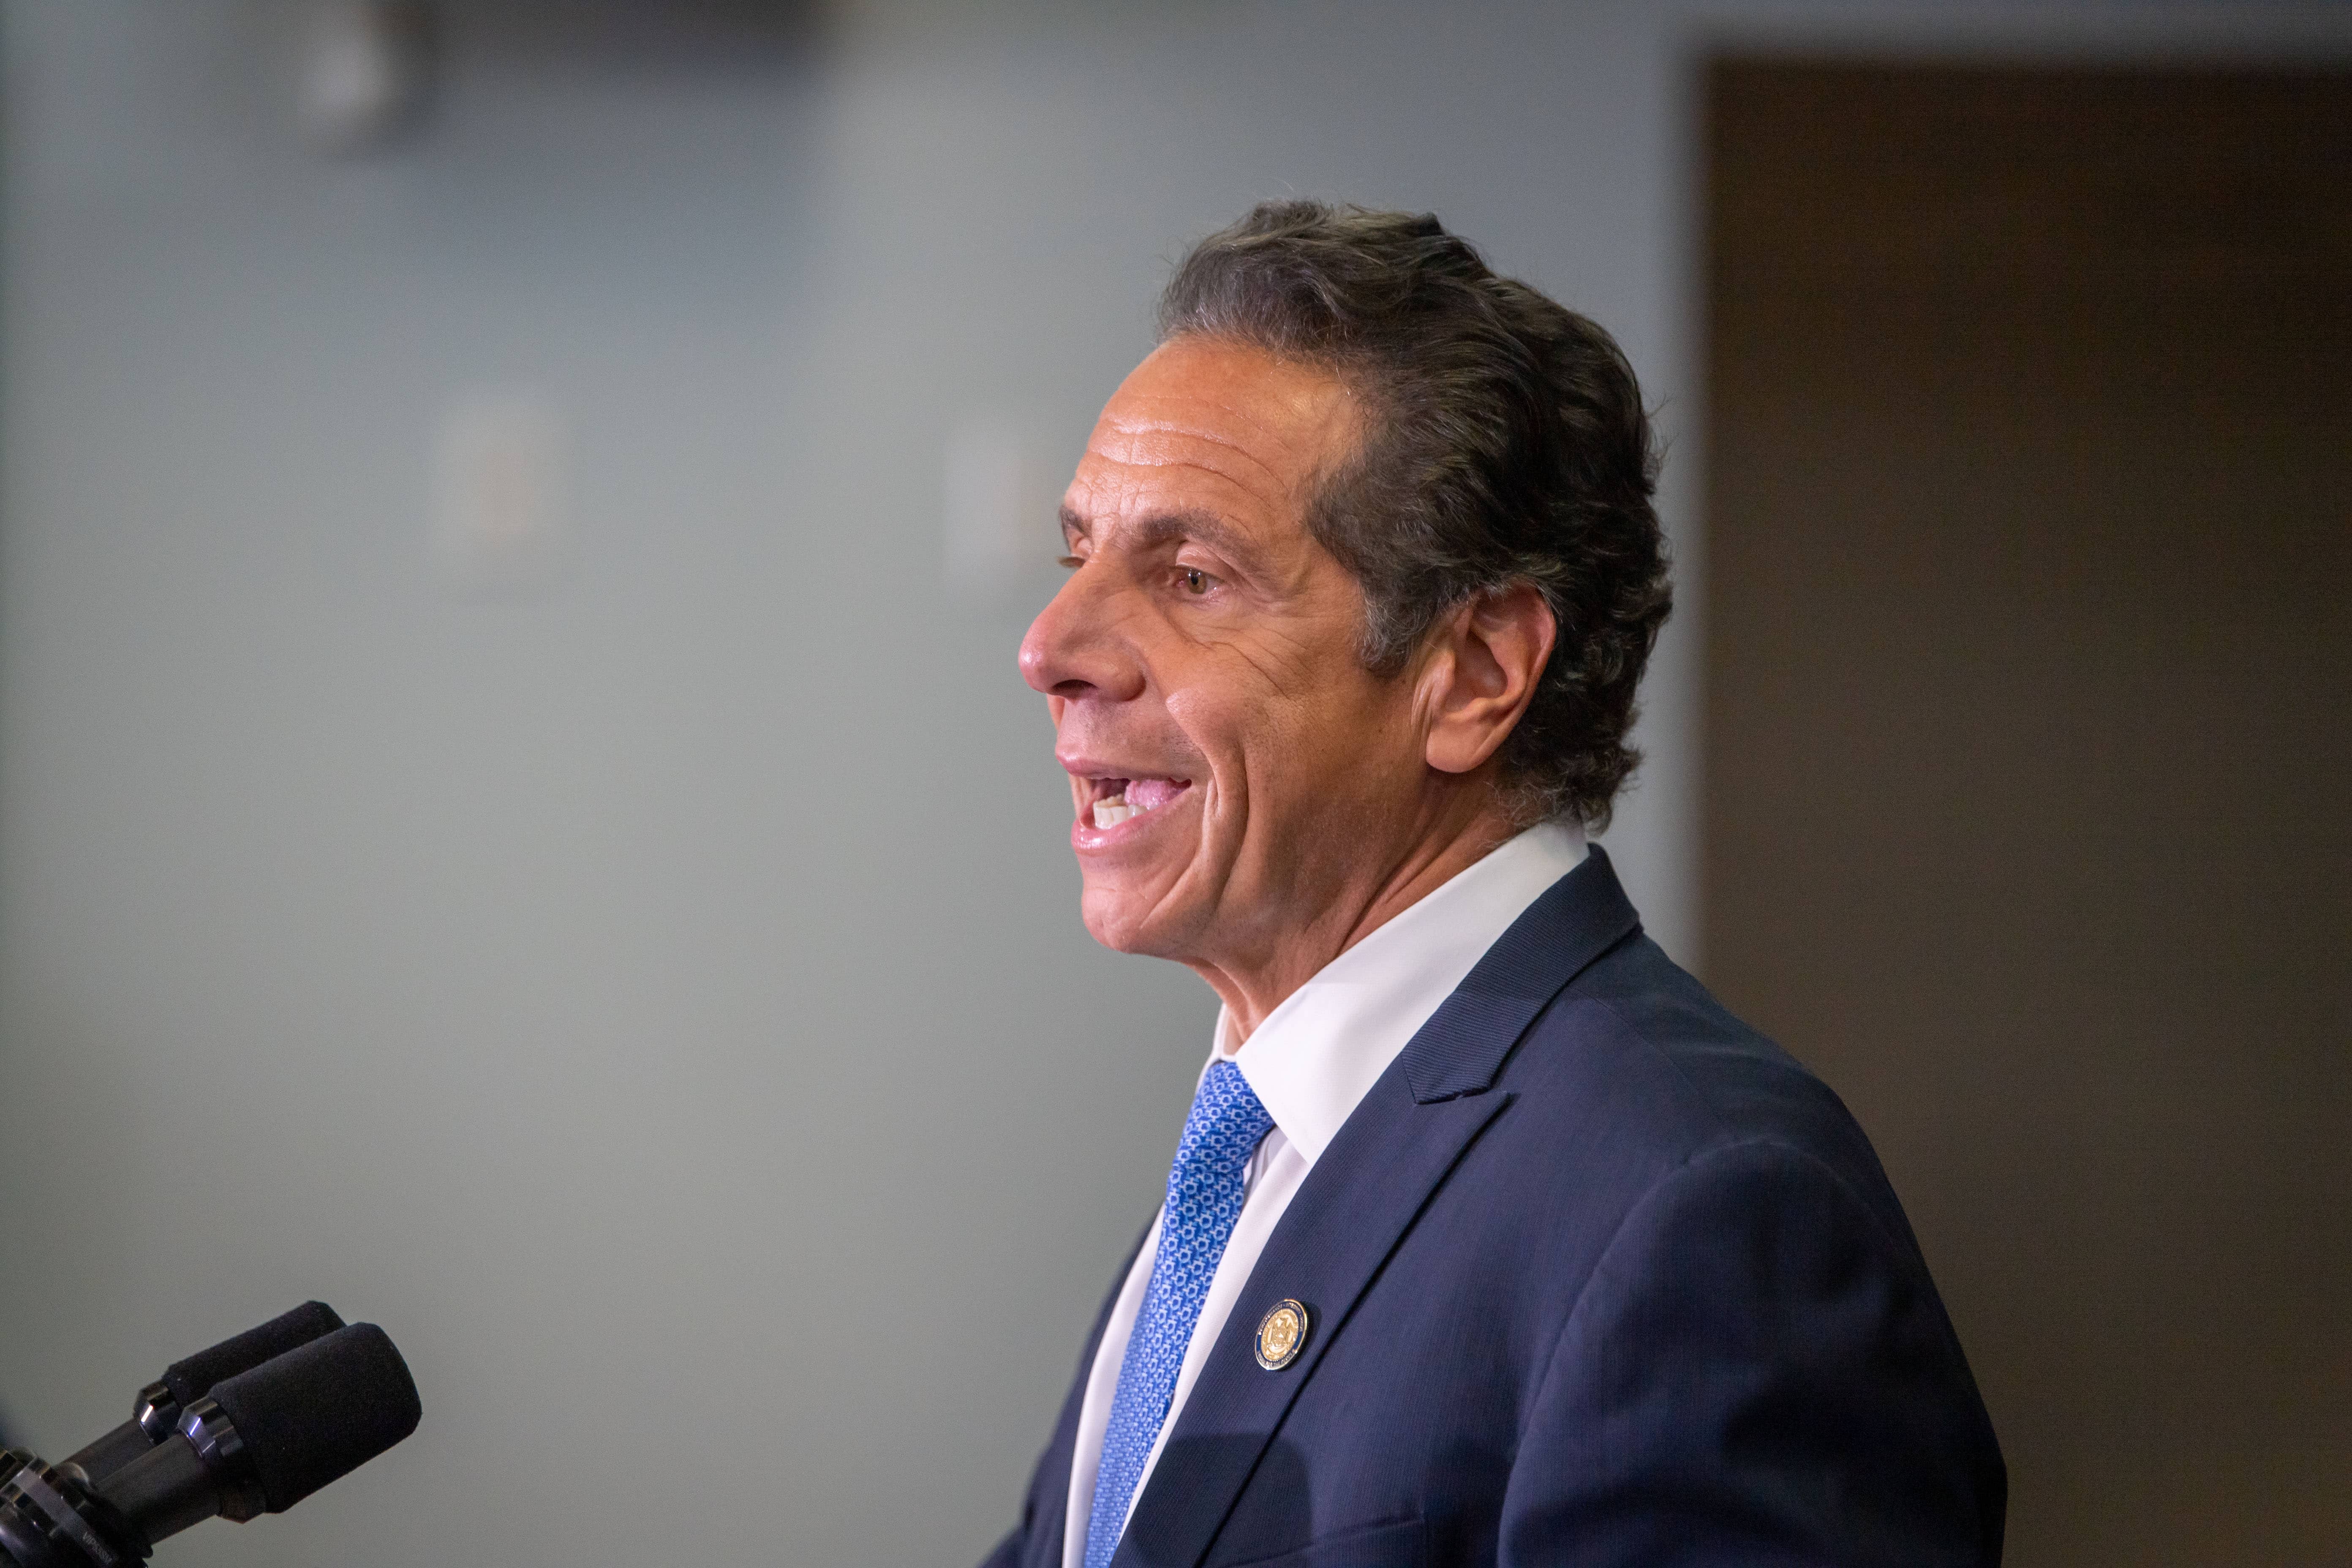 governor-cuomo-meets-with-nyc-democratic-mayoral-primary-winner-eric-adams-in-new-york-us-14-jul-2021